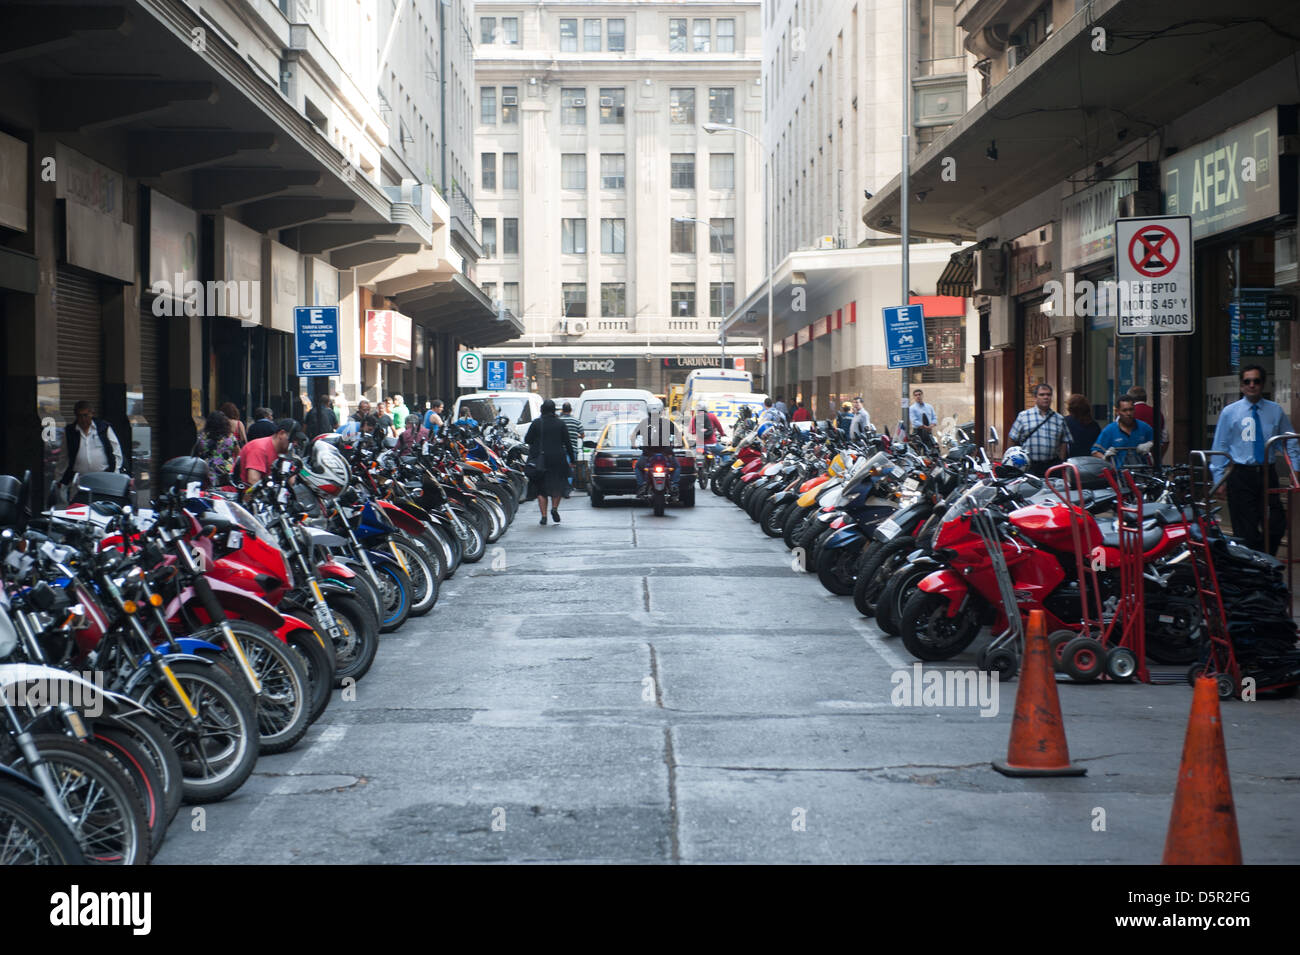 Motorbikes lined and parked in city in Santiago Chile Stock Photo